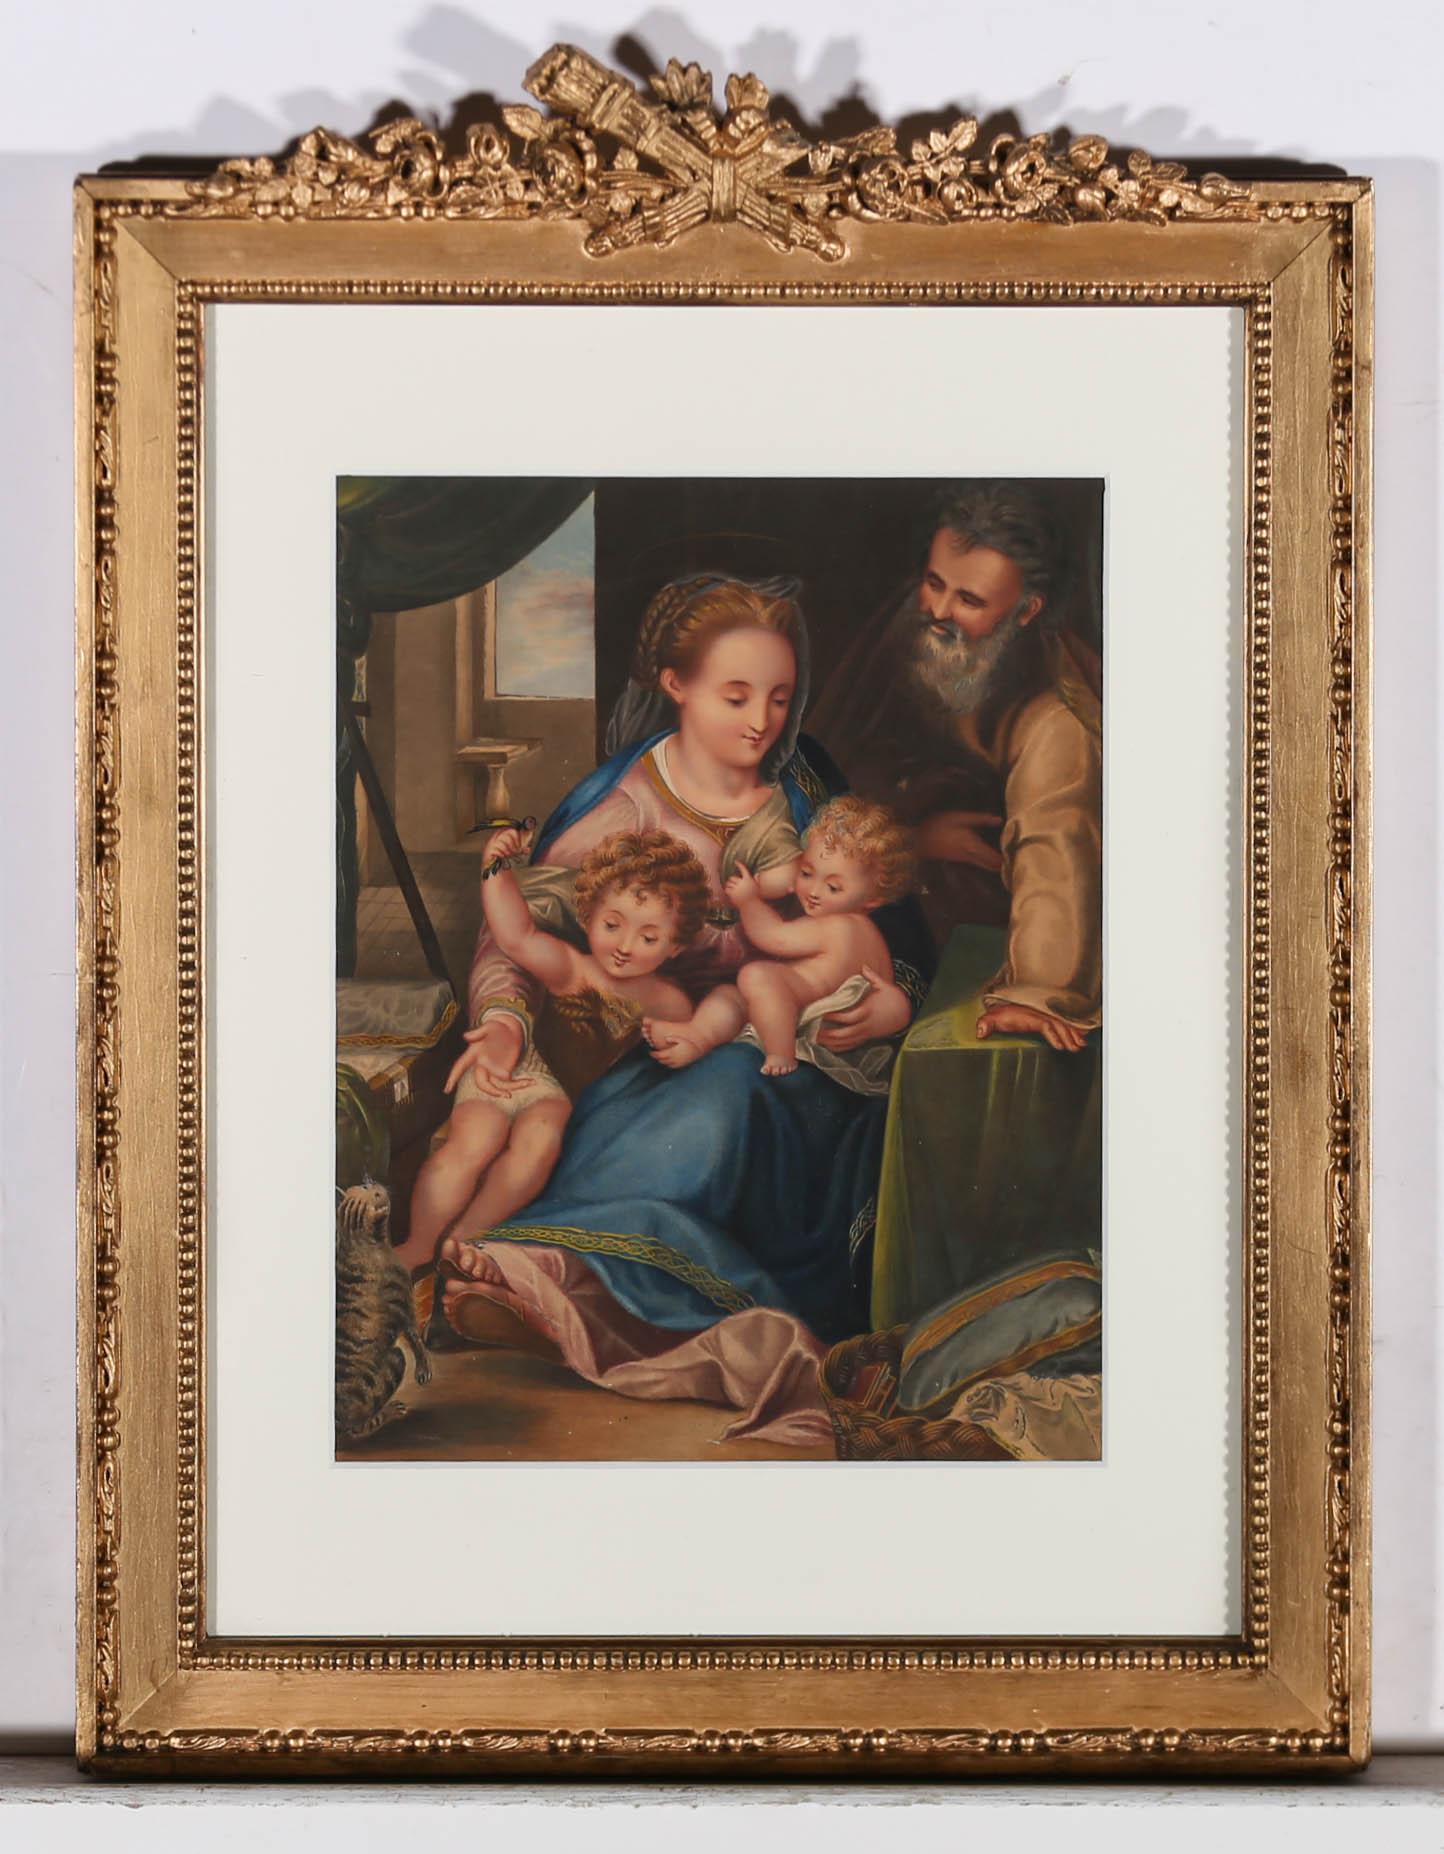 This exquisite copy of Federico Barocci's 'Madonna of the Cat' depicts the holy family together in a Renaissance style bedchamber. The Madonna holds an infant Christ in one arm and his older cousin John the Baptist in another as Saint Joseph